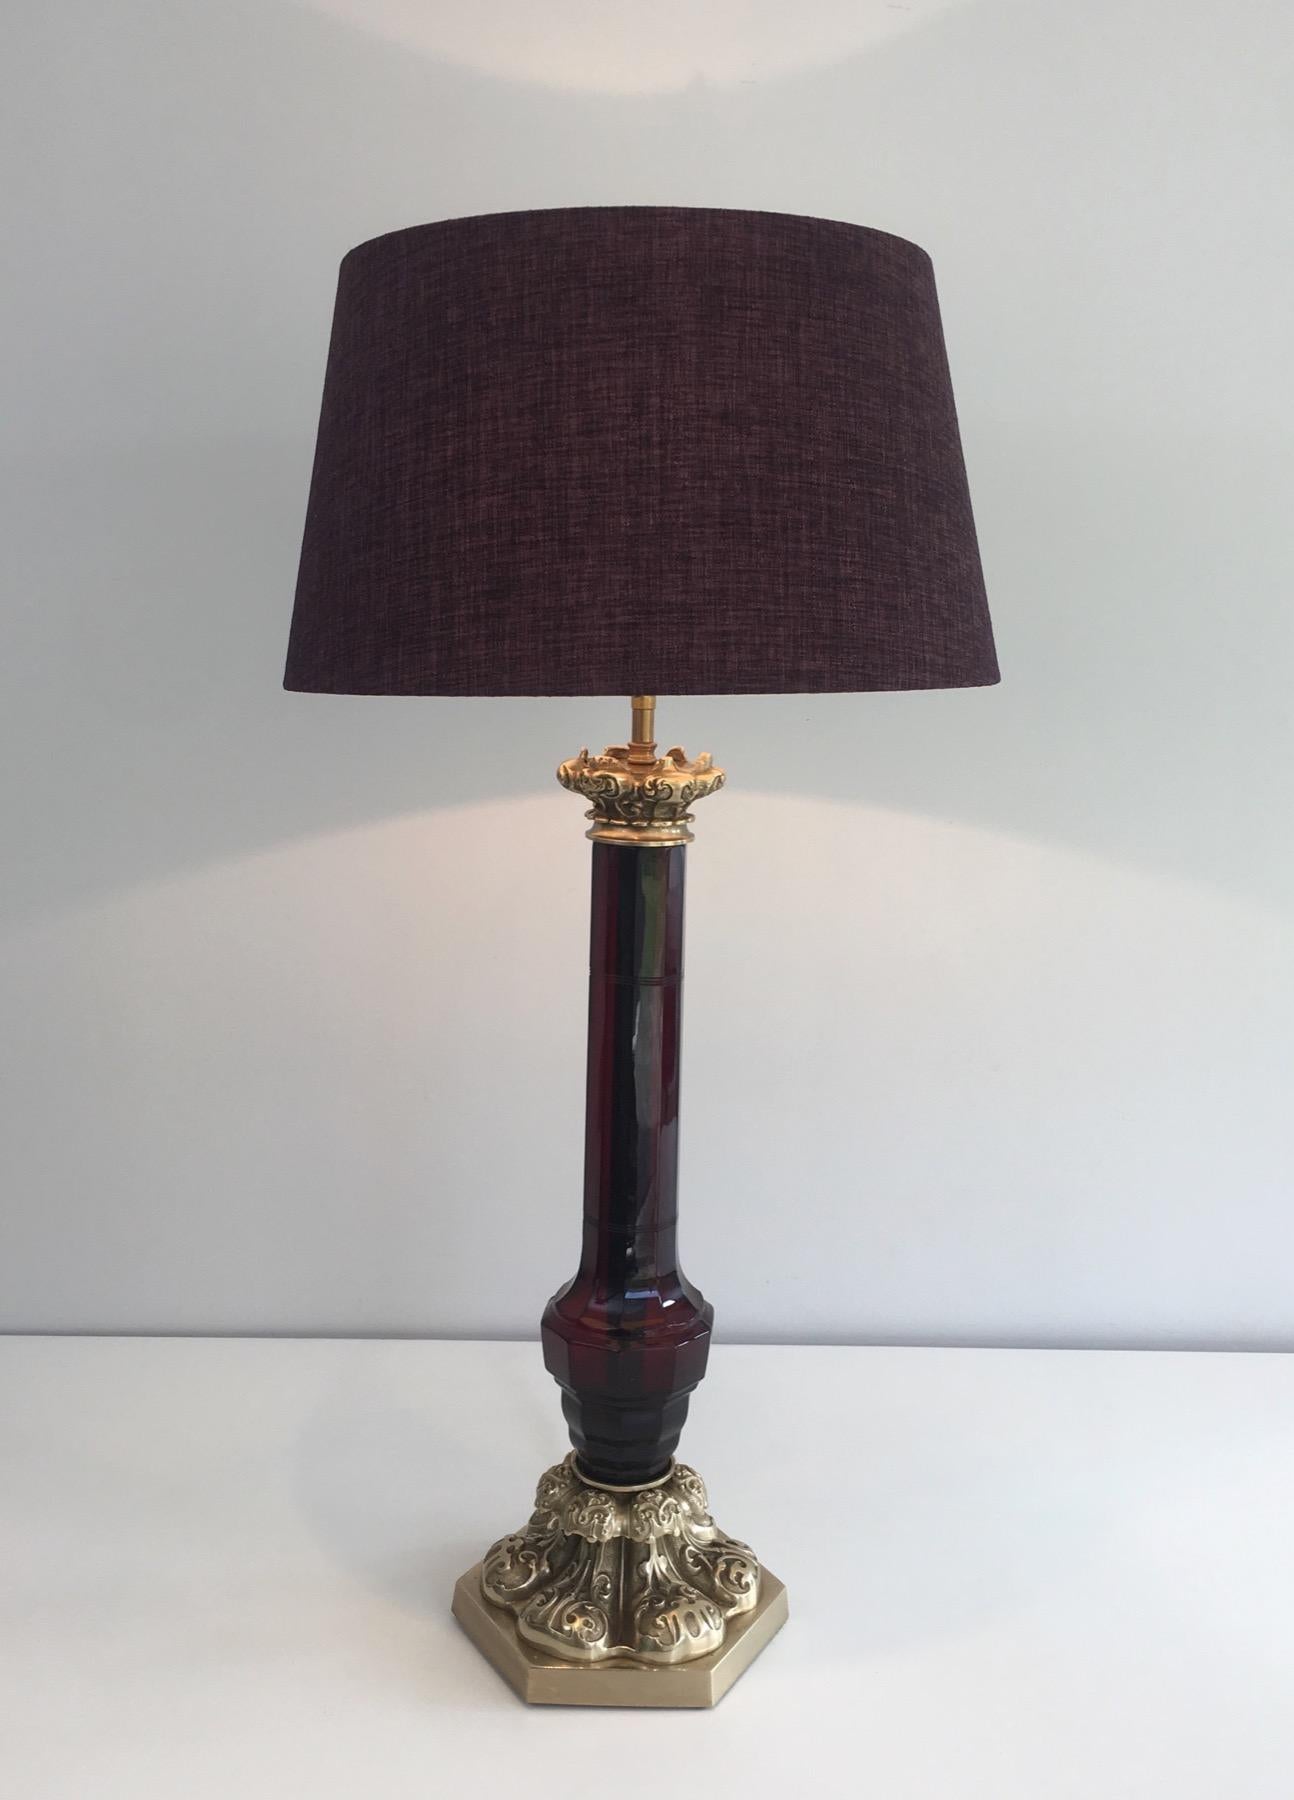 This beautiful neoclassical style table lamp is made of red crystal and chiseled bronze. This is a very fine work, attributed to famous French designer crystal & Bronze, Paris, circa 1940.